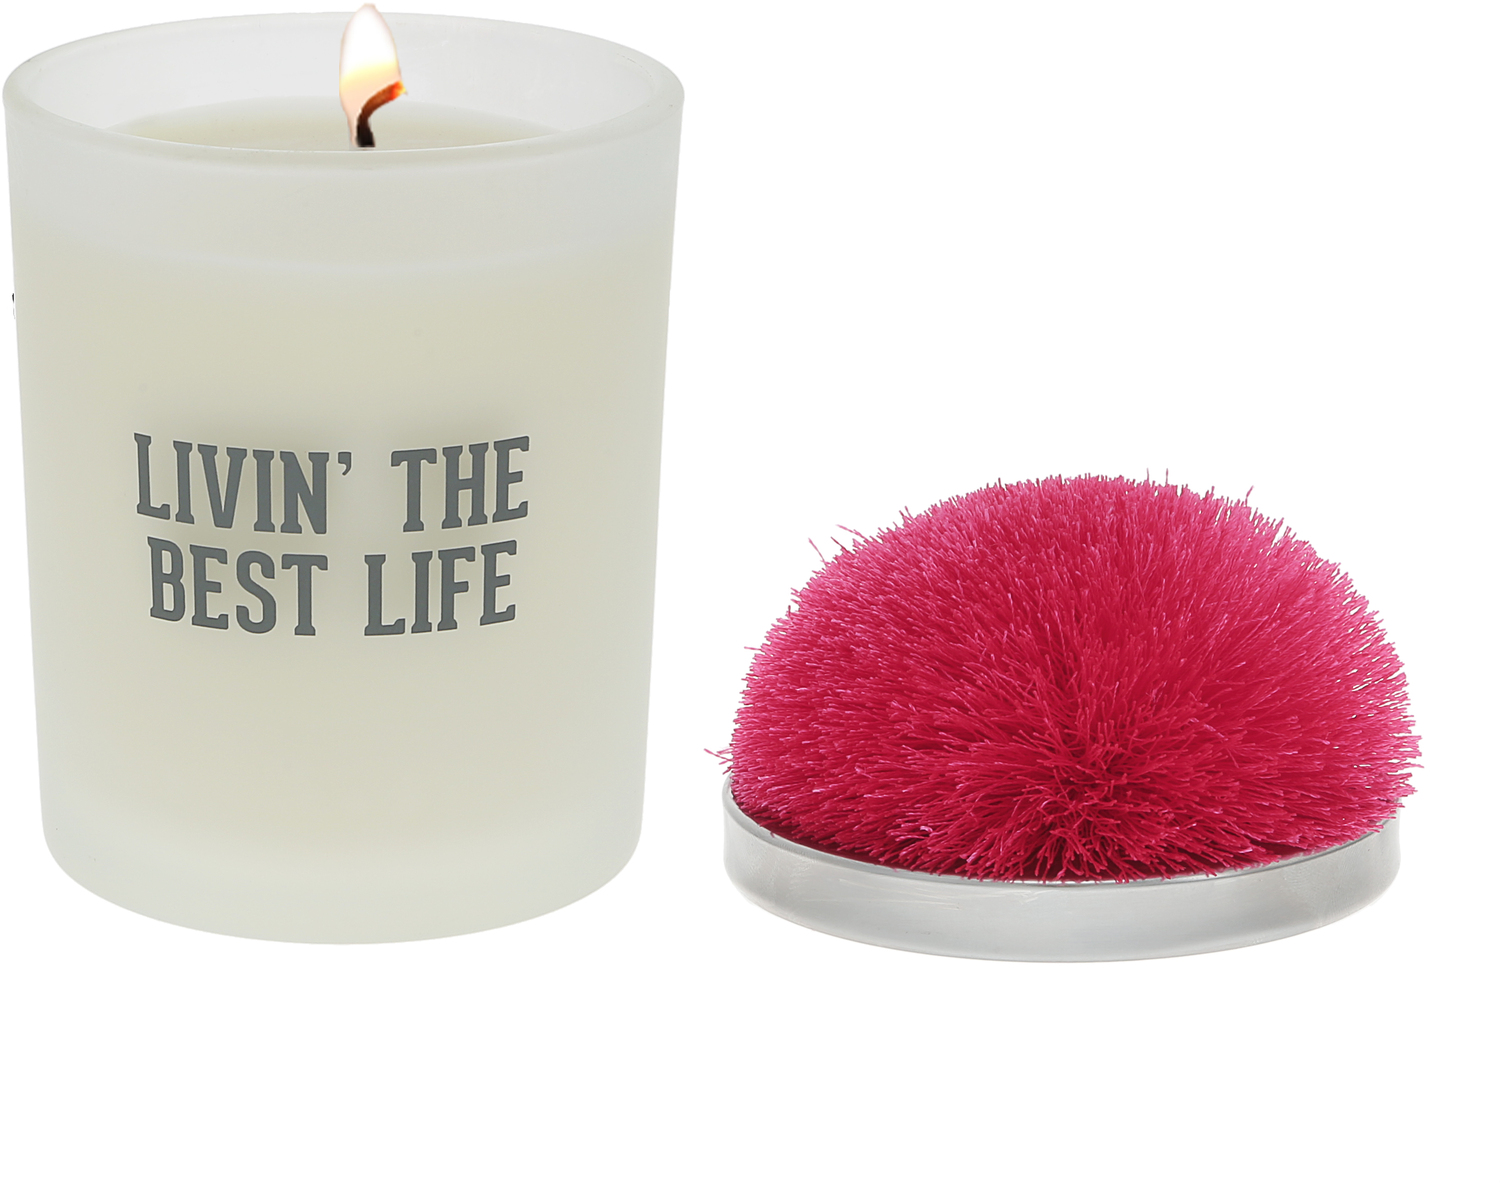 Best Life - Hot Pink by Repre-Scent - Best Life - Hot Pink - 5.5 oz - 100% Soy Wax Candle with Pom Pom Lid
Scent: Tranquility